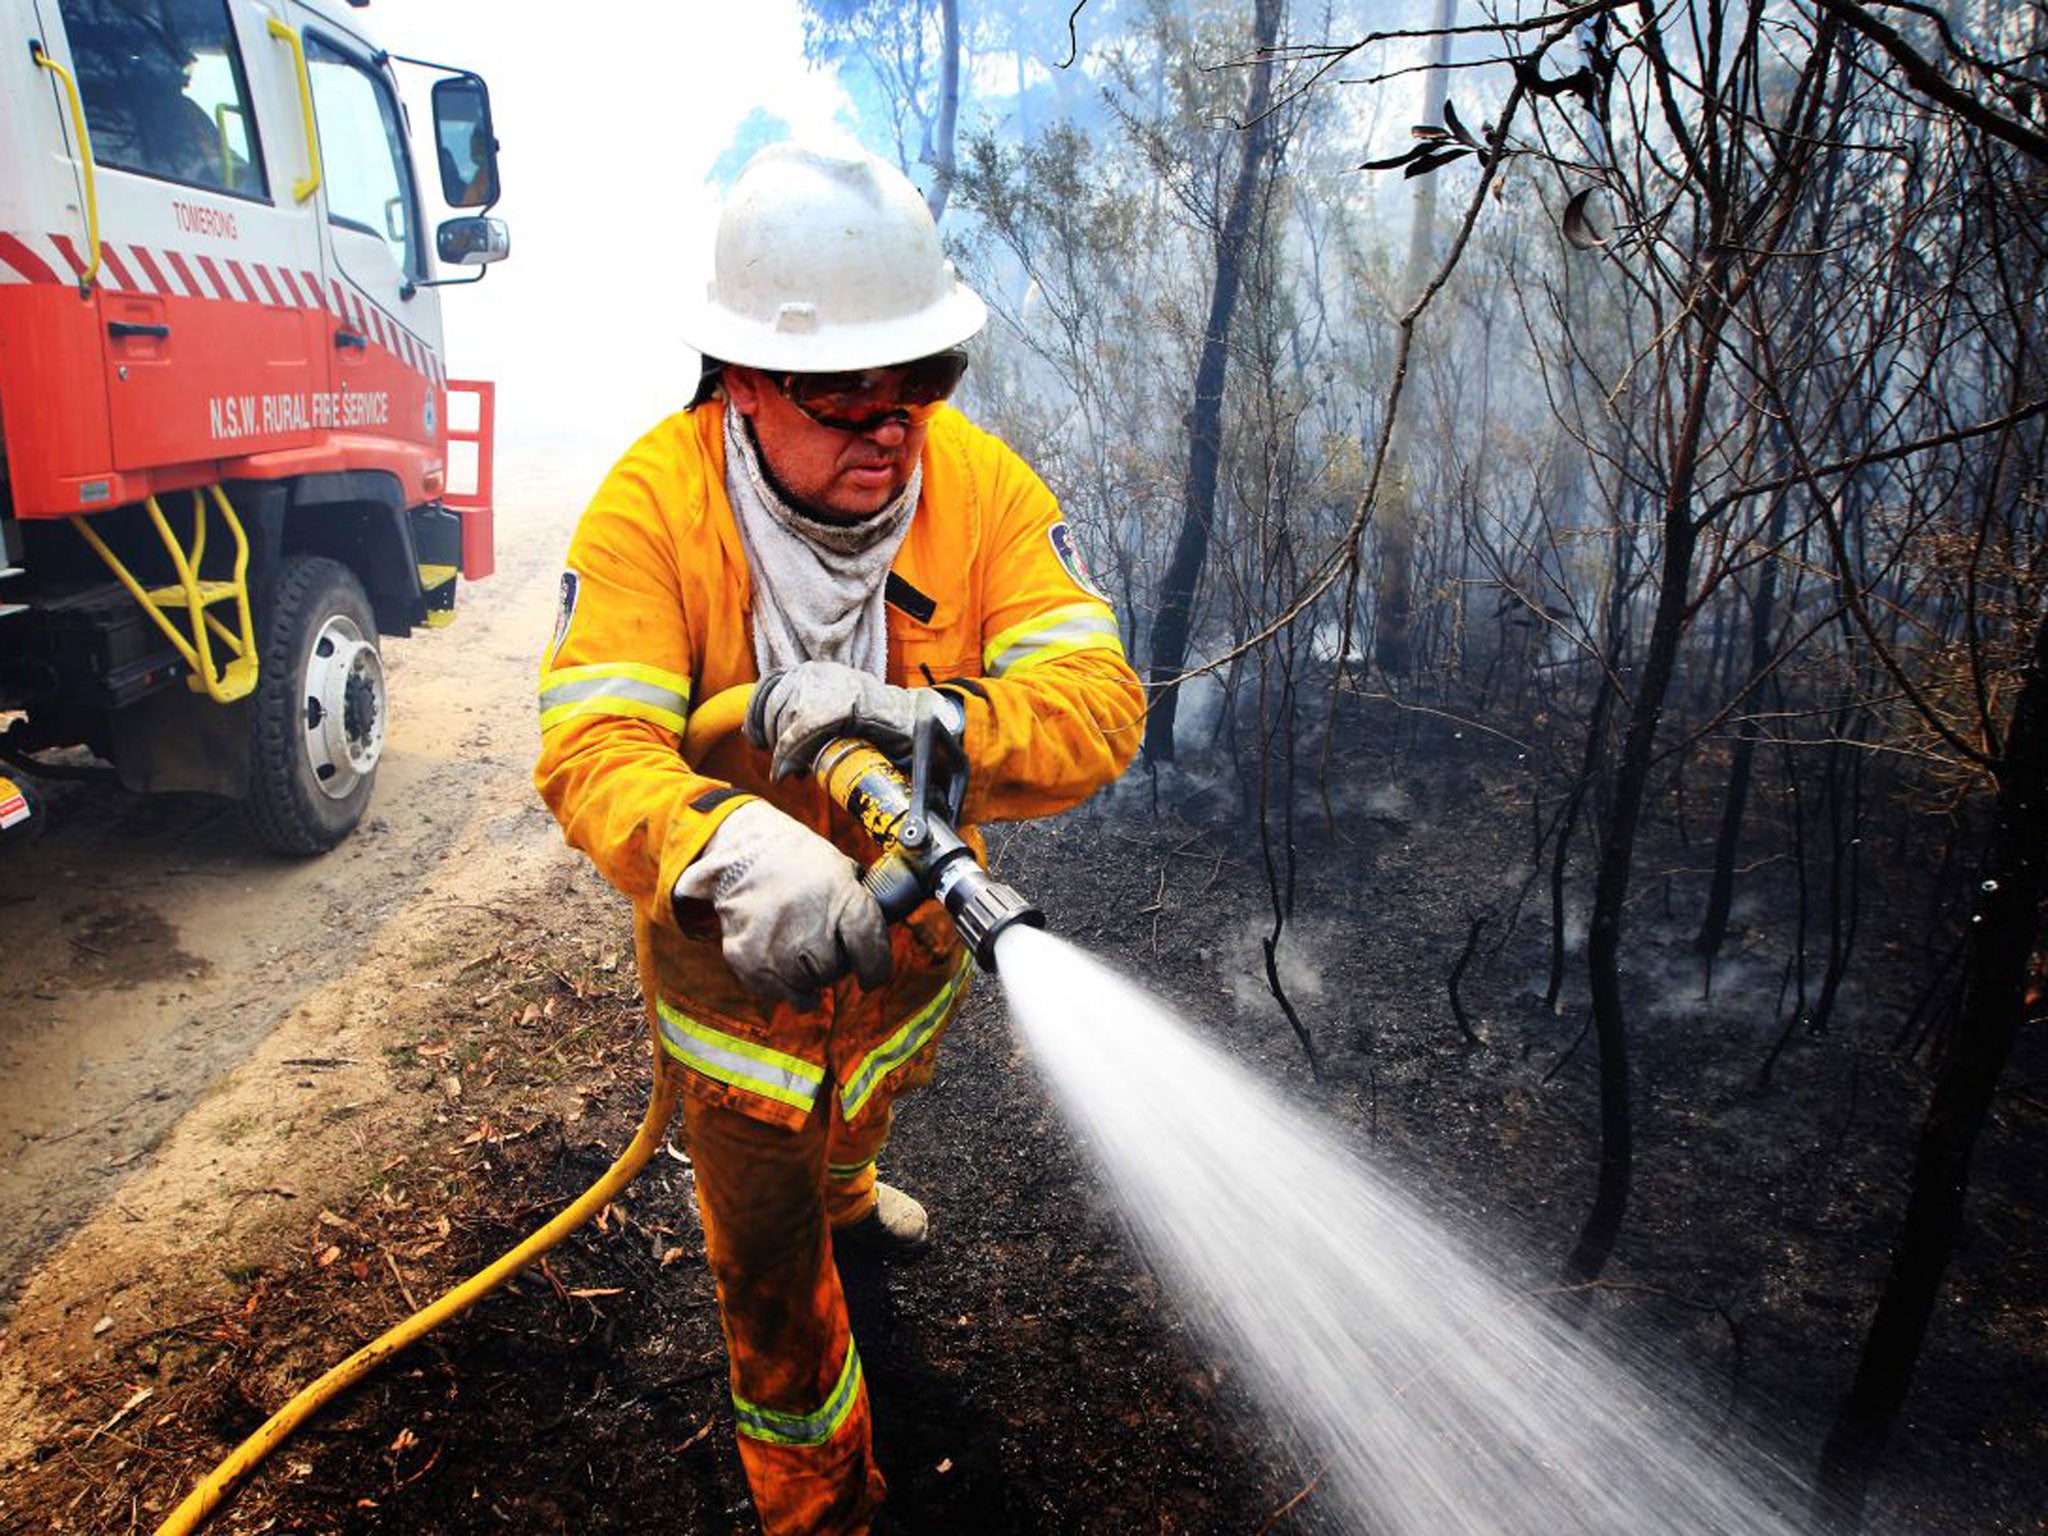 A firefighter in Jerrawangala National Park, New South Wales